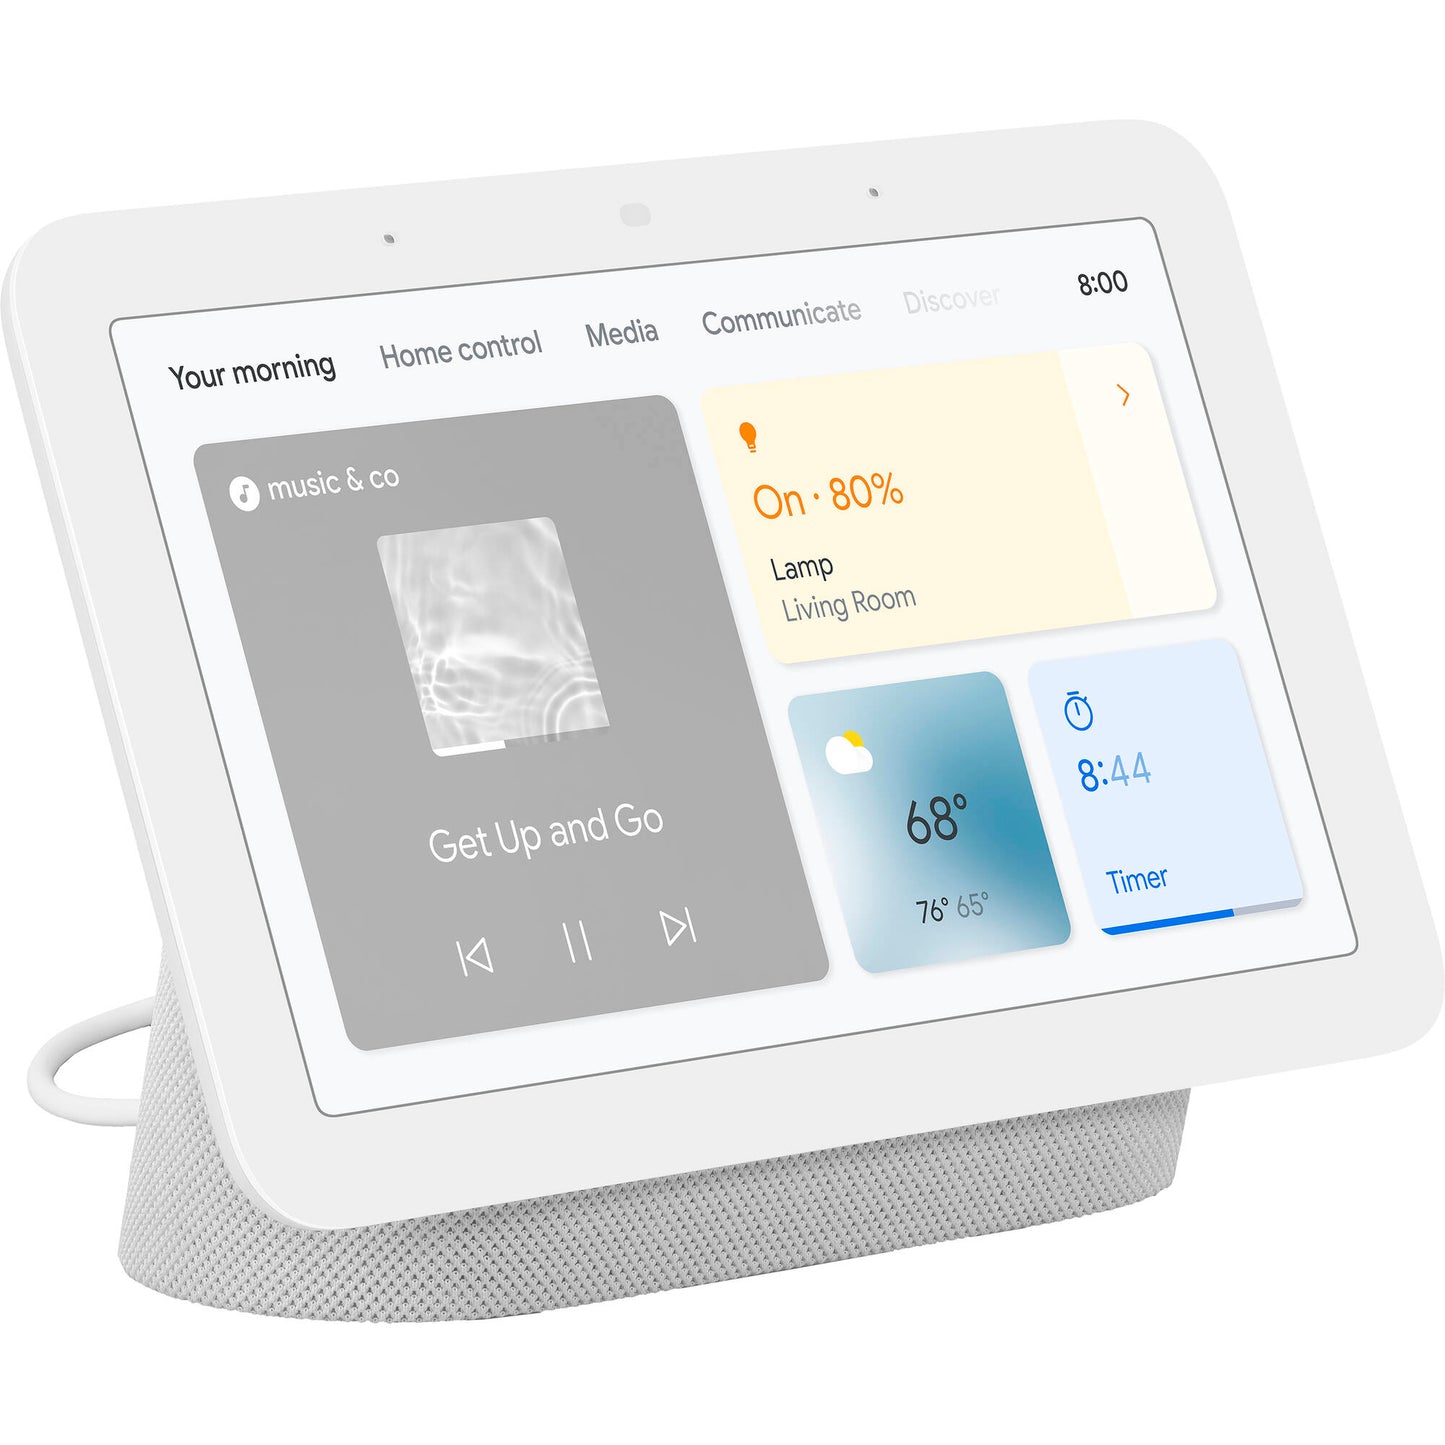 Google Nest Hub (2nd Gen) 7" Smart Home Controller with Google Assistant, WiFi Bluetooth Wireless Connectivity, Touchscreen Display, Alarm and Speaker (Chalk, Charcoal, Sand)